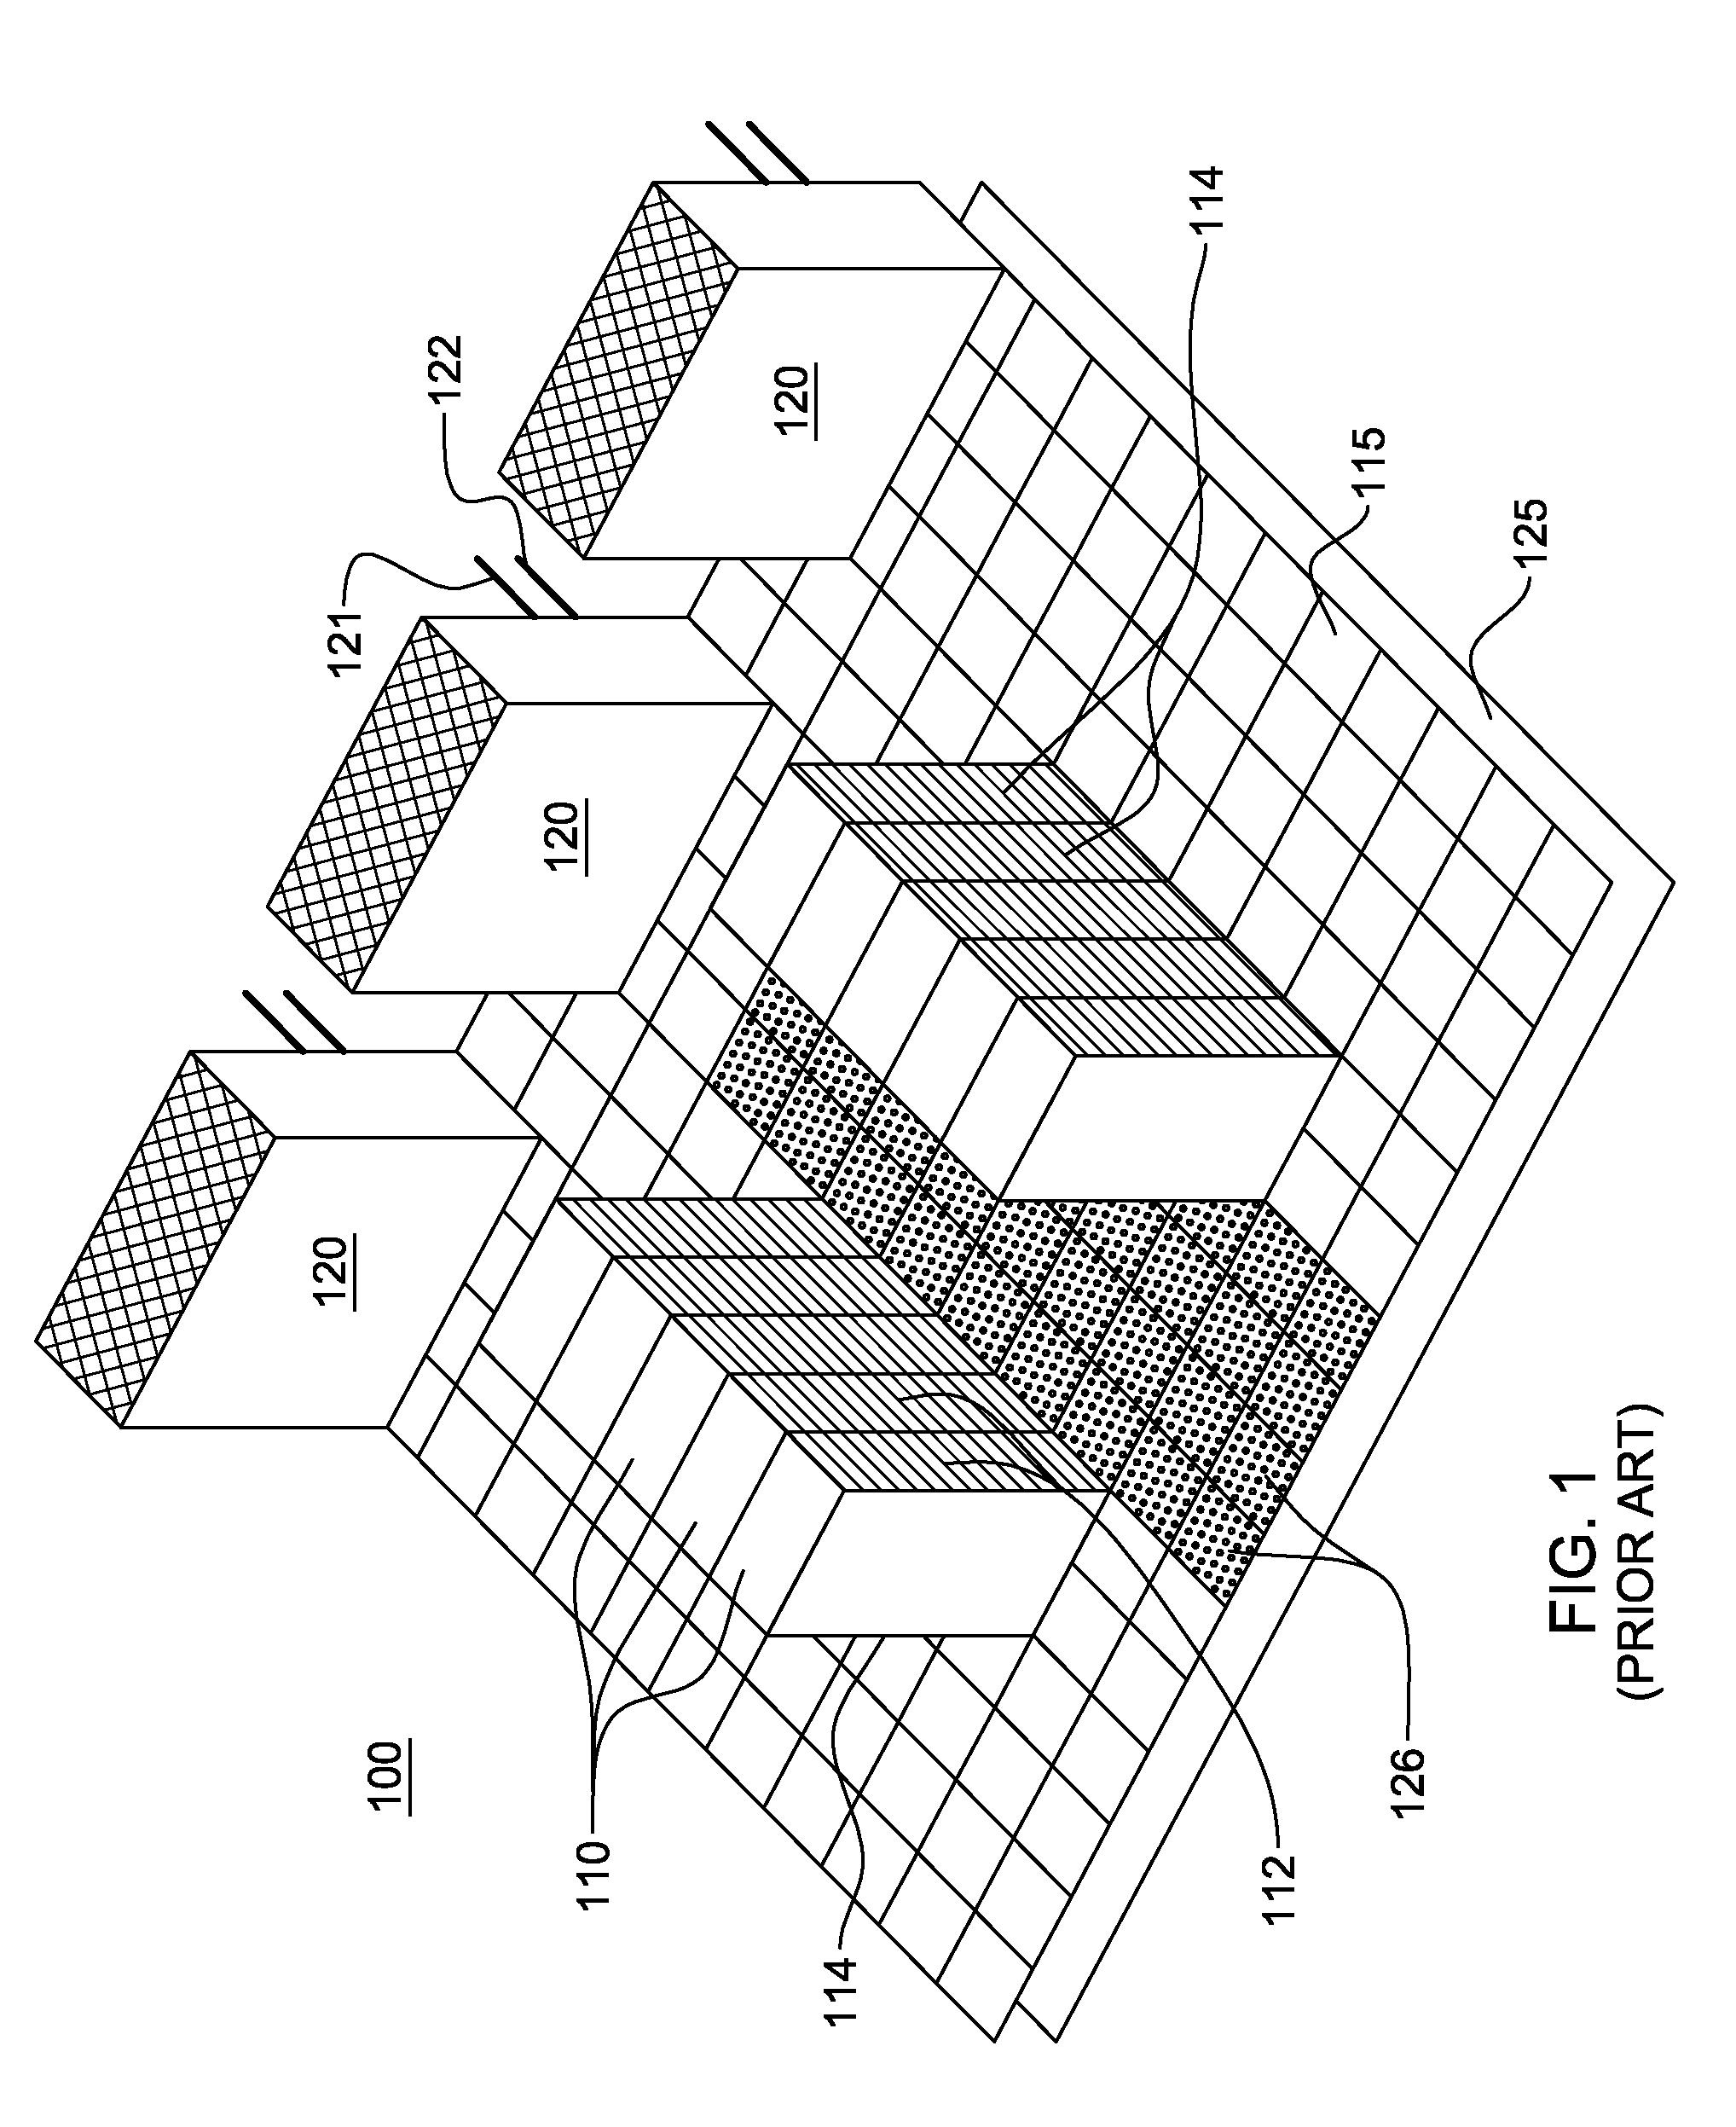 Method of facilitating cooling of electronics racks of a data center employing multiple cooling stations